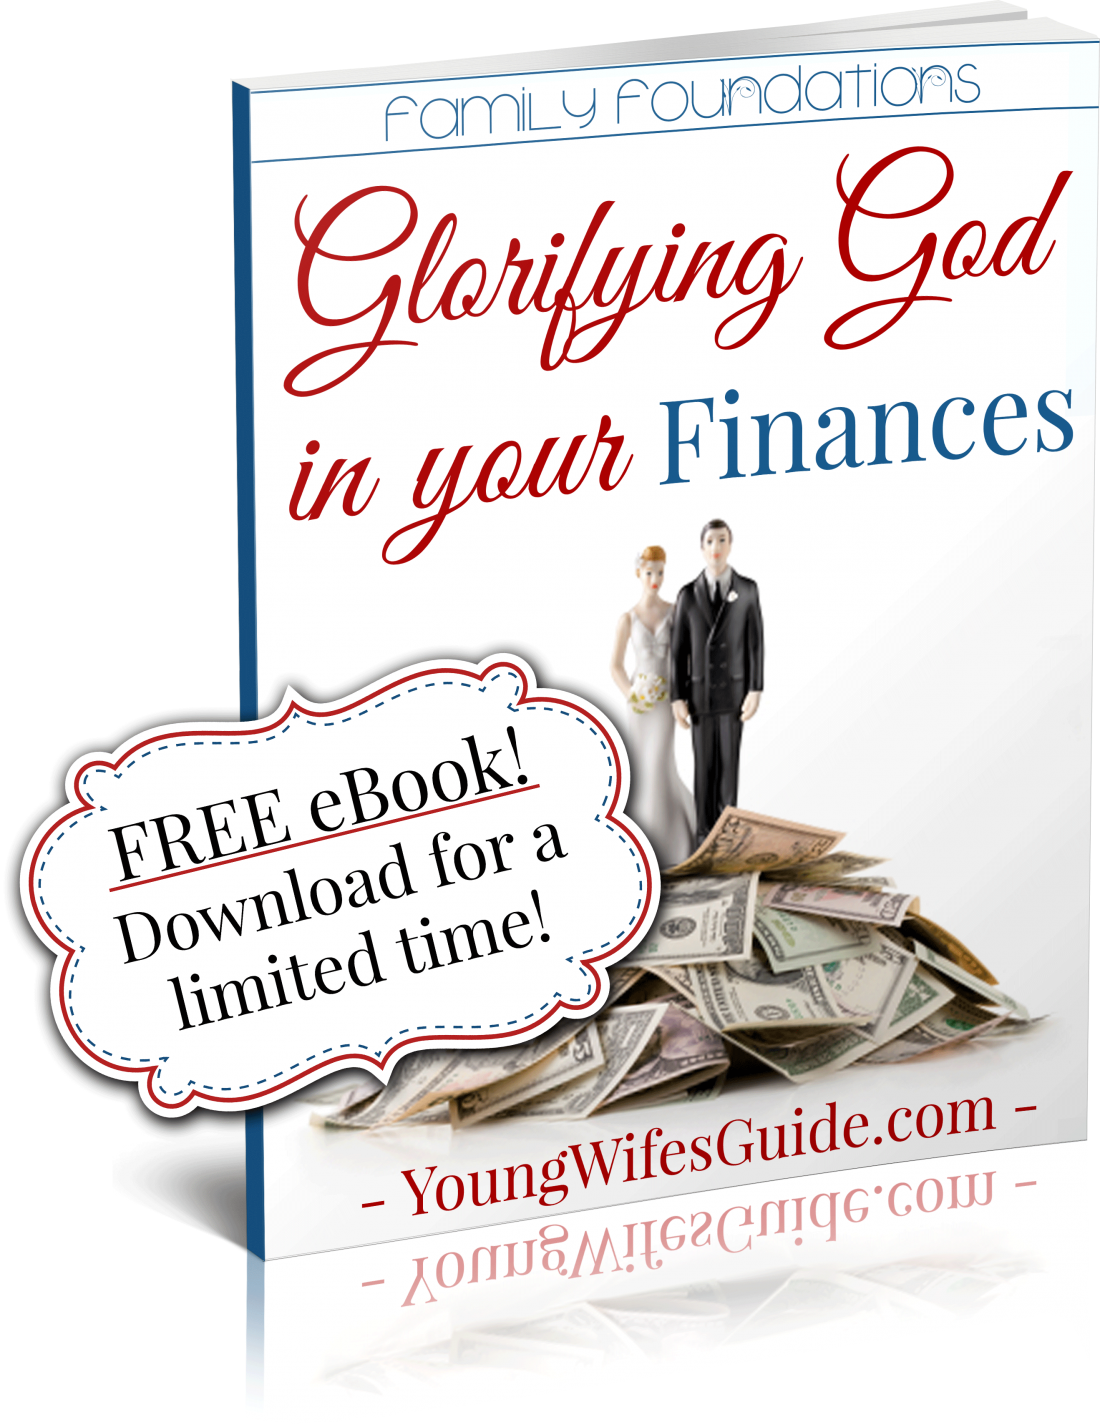 Learn how to come together with your spouse and glorify God with your finances! FREE for a limited time!